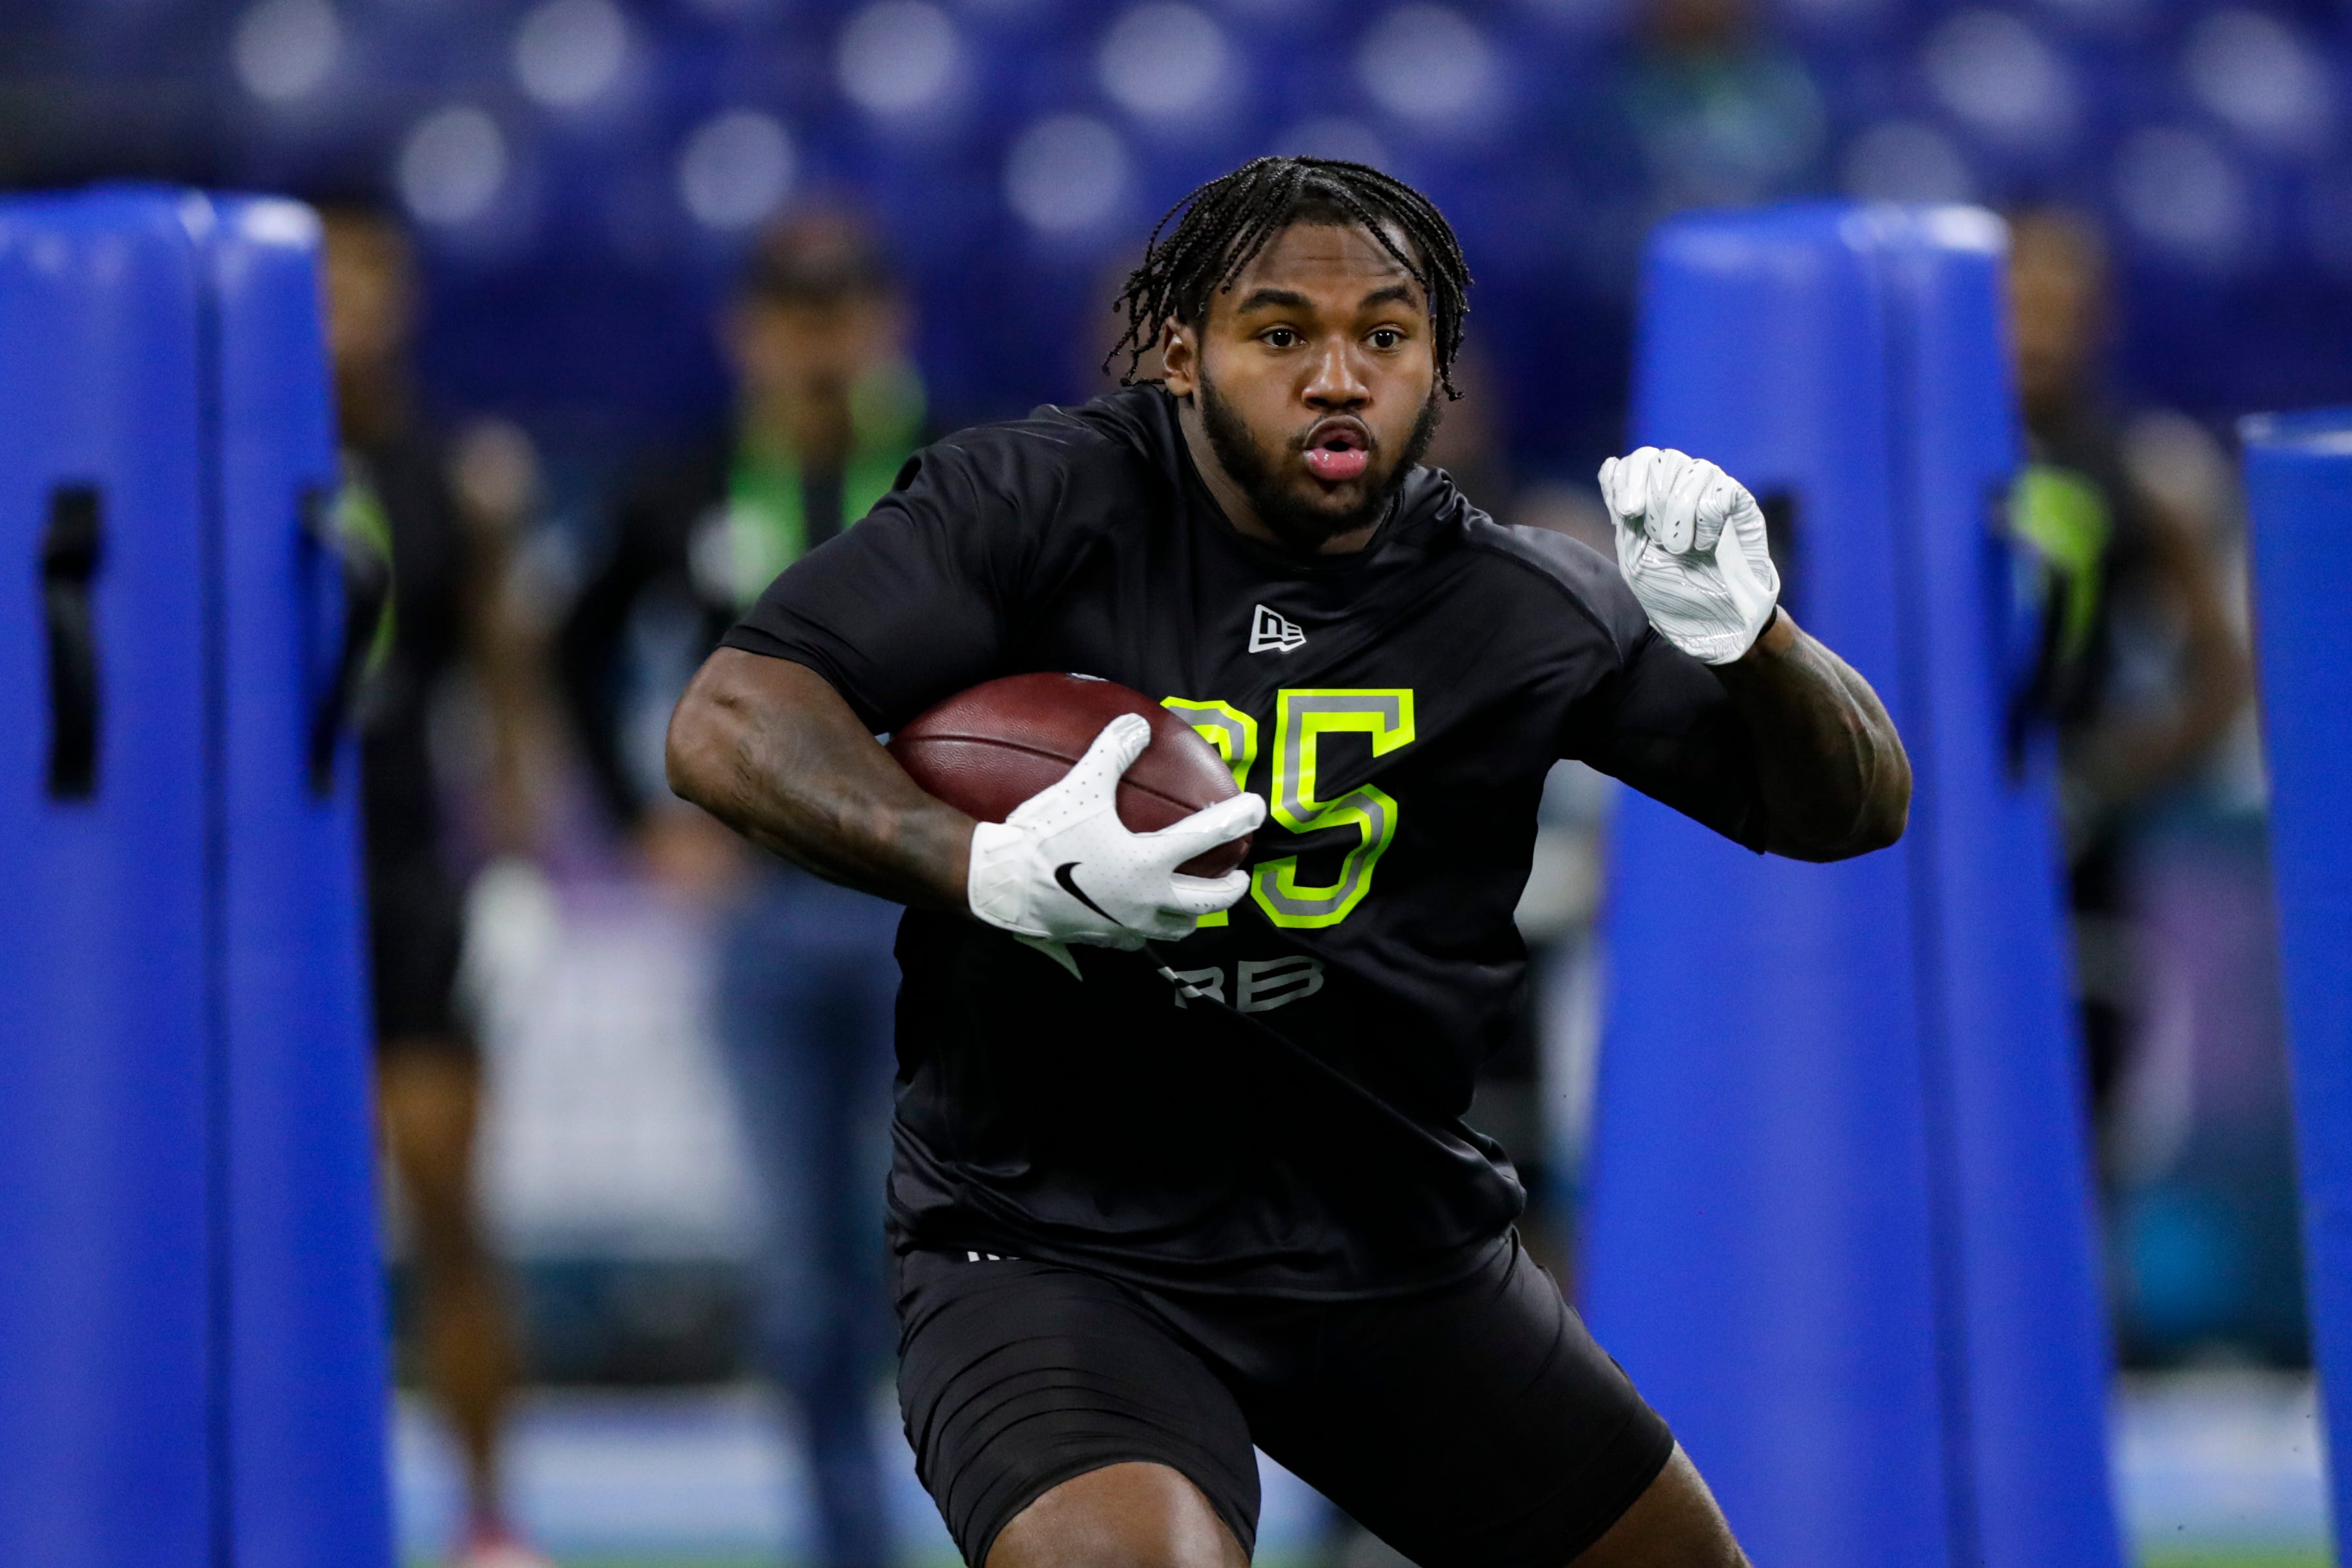 Georgia running back D'Andre Swift runs a drill at the NFL Combine.